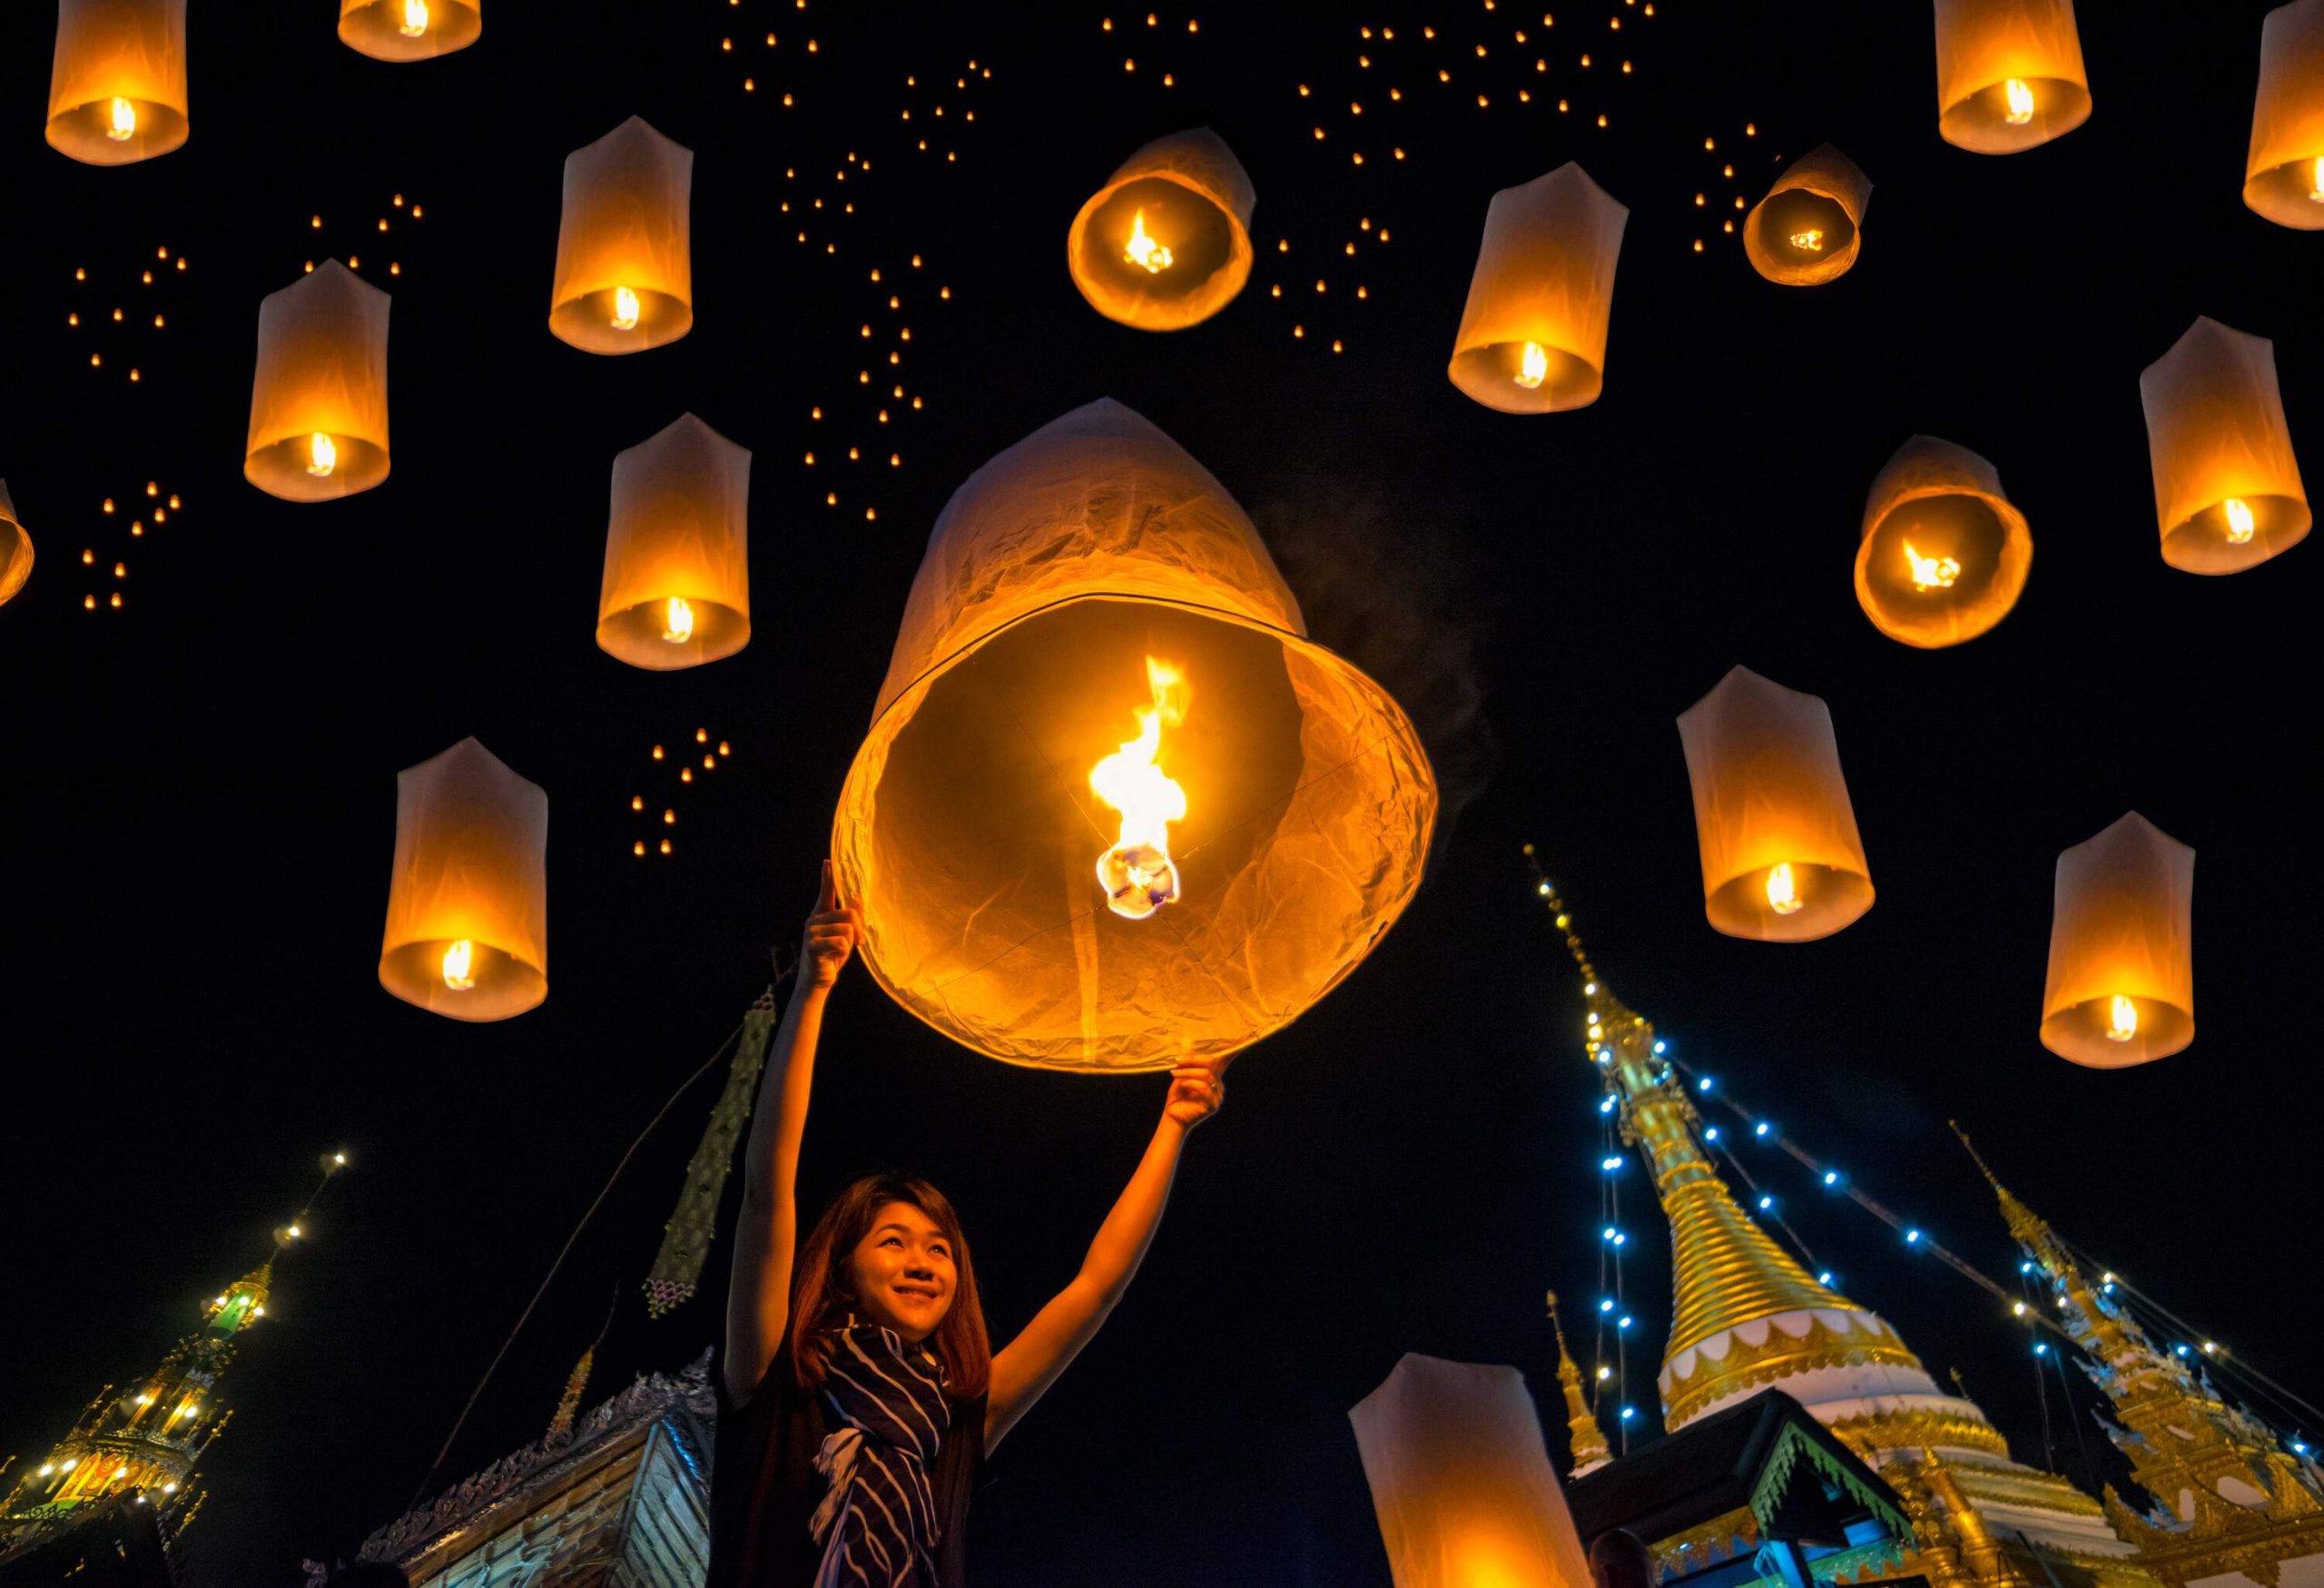 A young woman smiling as she releases a lit paper lantern into the night sky.